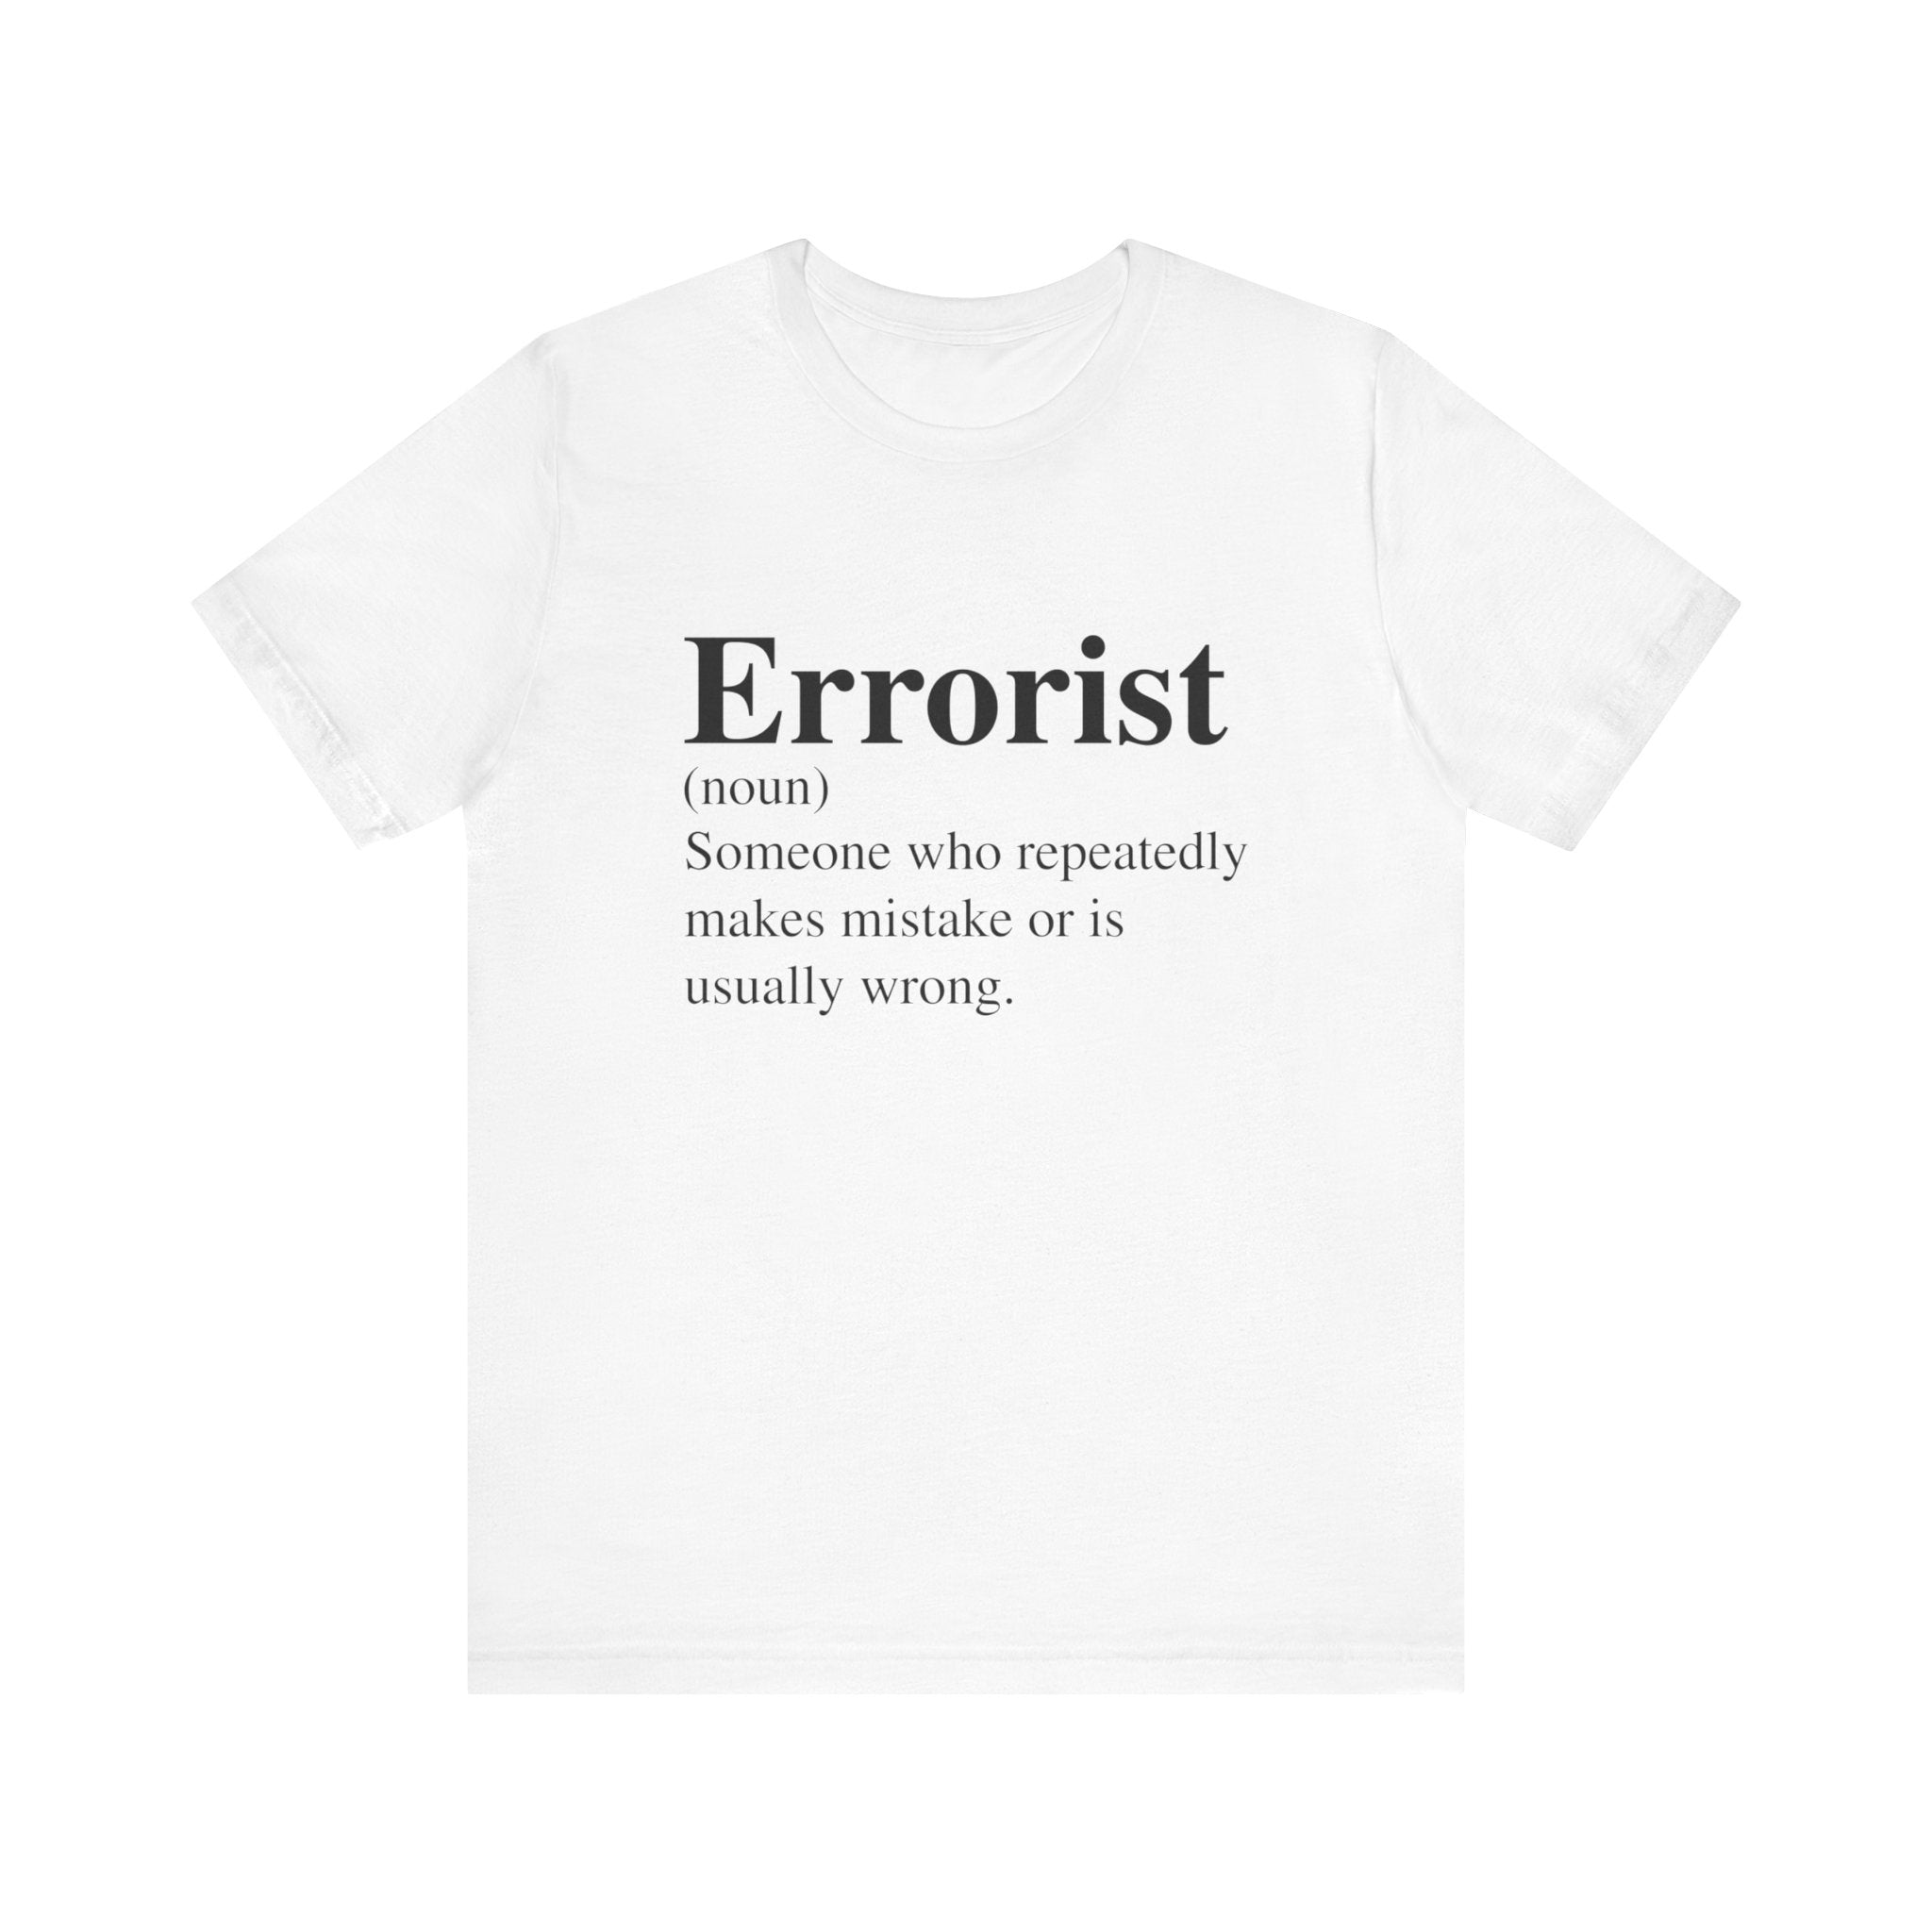 Unisex Errorist T-Shirt with the word "Errorist" and its definition printed in black text on the front.